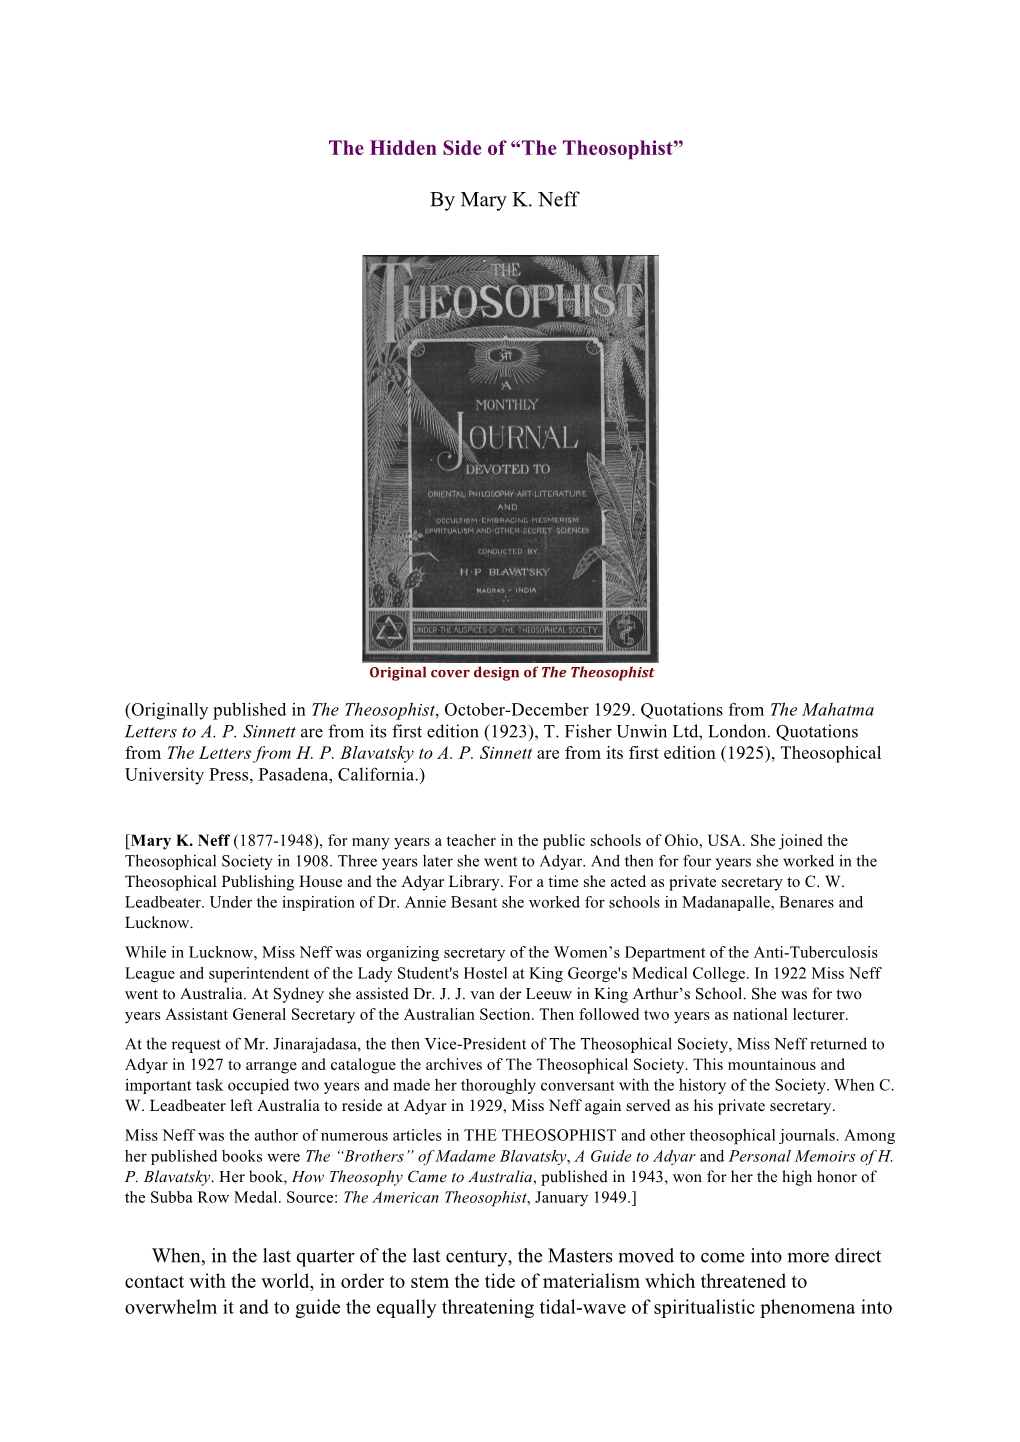 The Hidden Side of “The Theosophist” by Mary K. Neff When, in the Last Quarter of the Last Century, the Masters Moved To